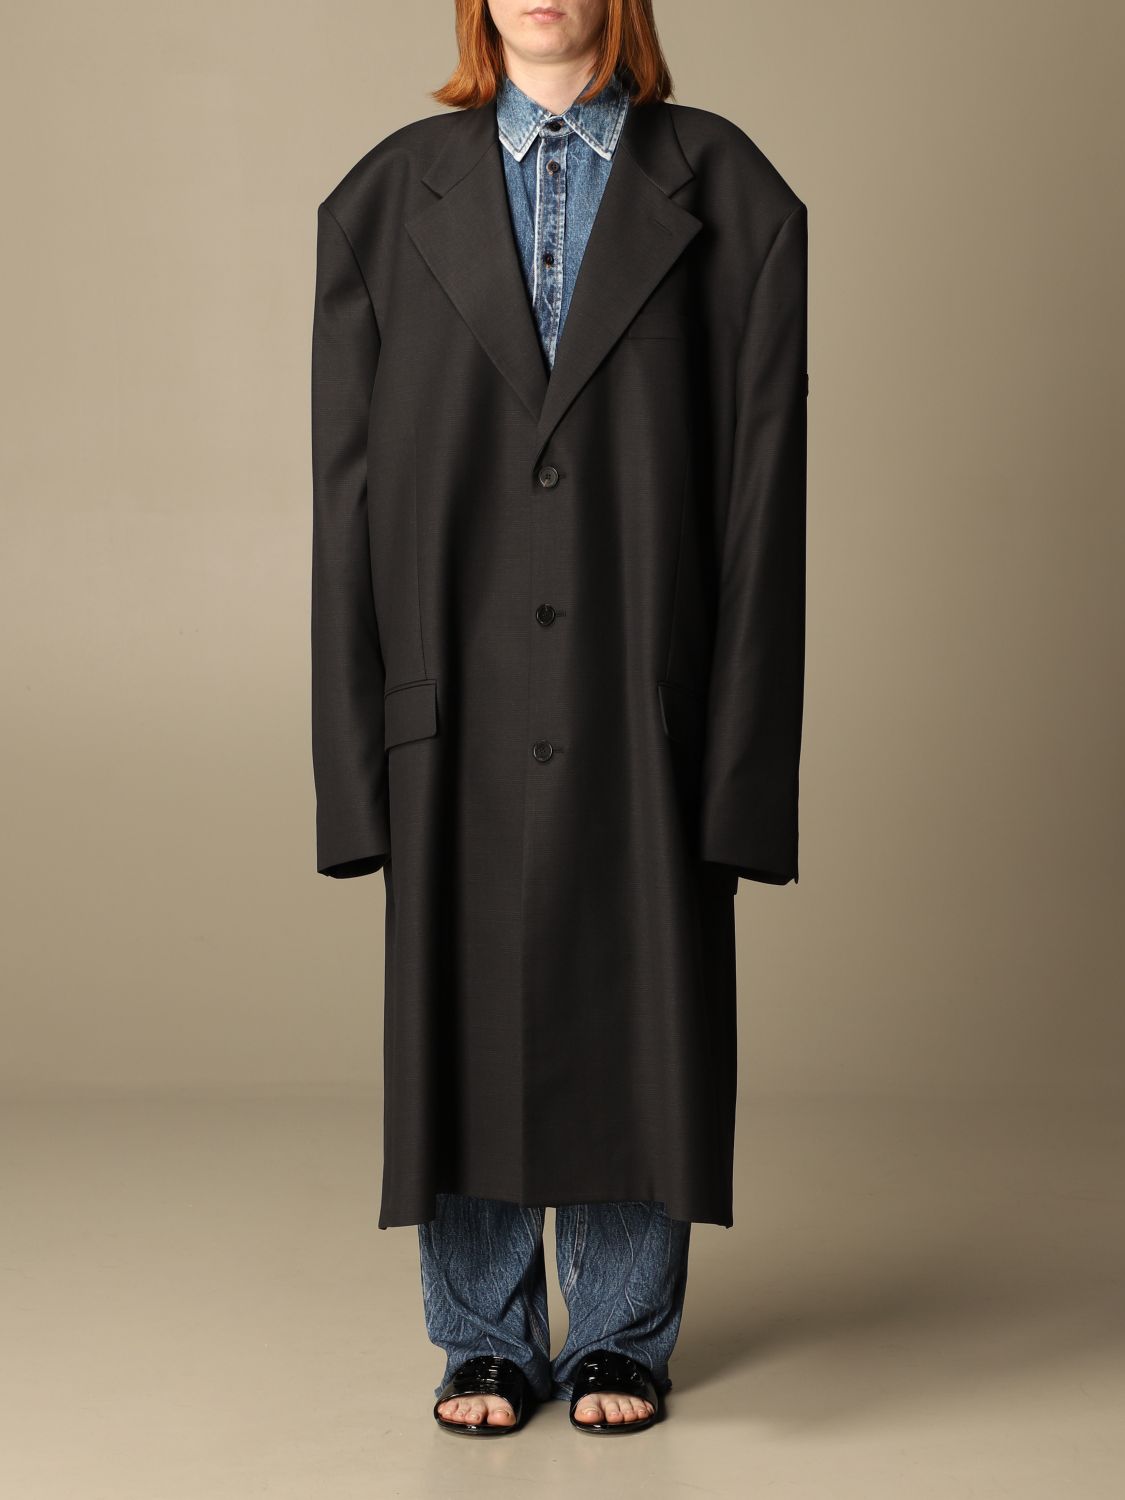 BALENCIAGA Hourglass oversized doublebreasted wool and cottonblend trench  coat  NETAPORTER